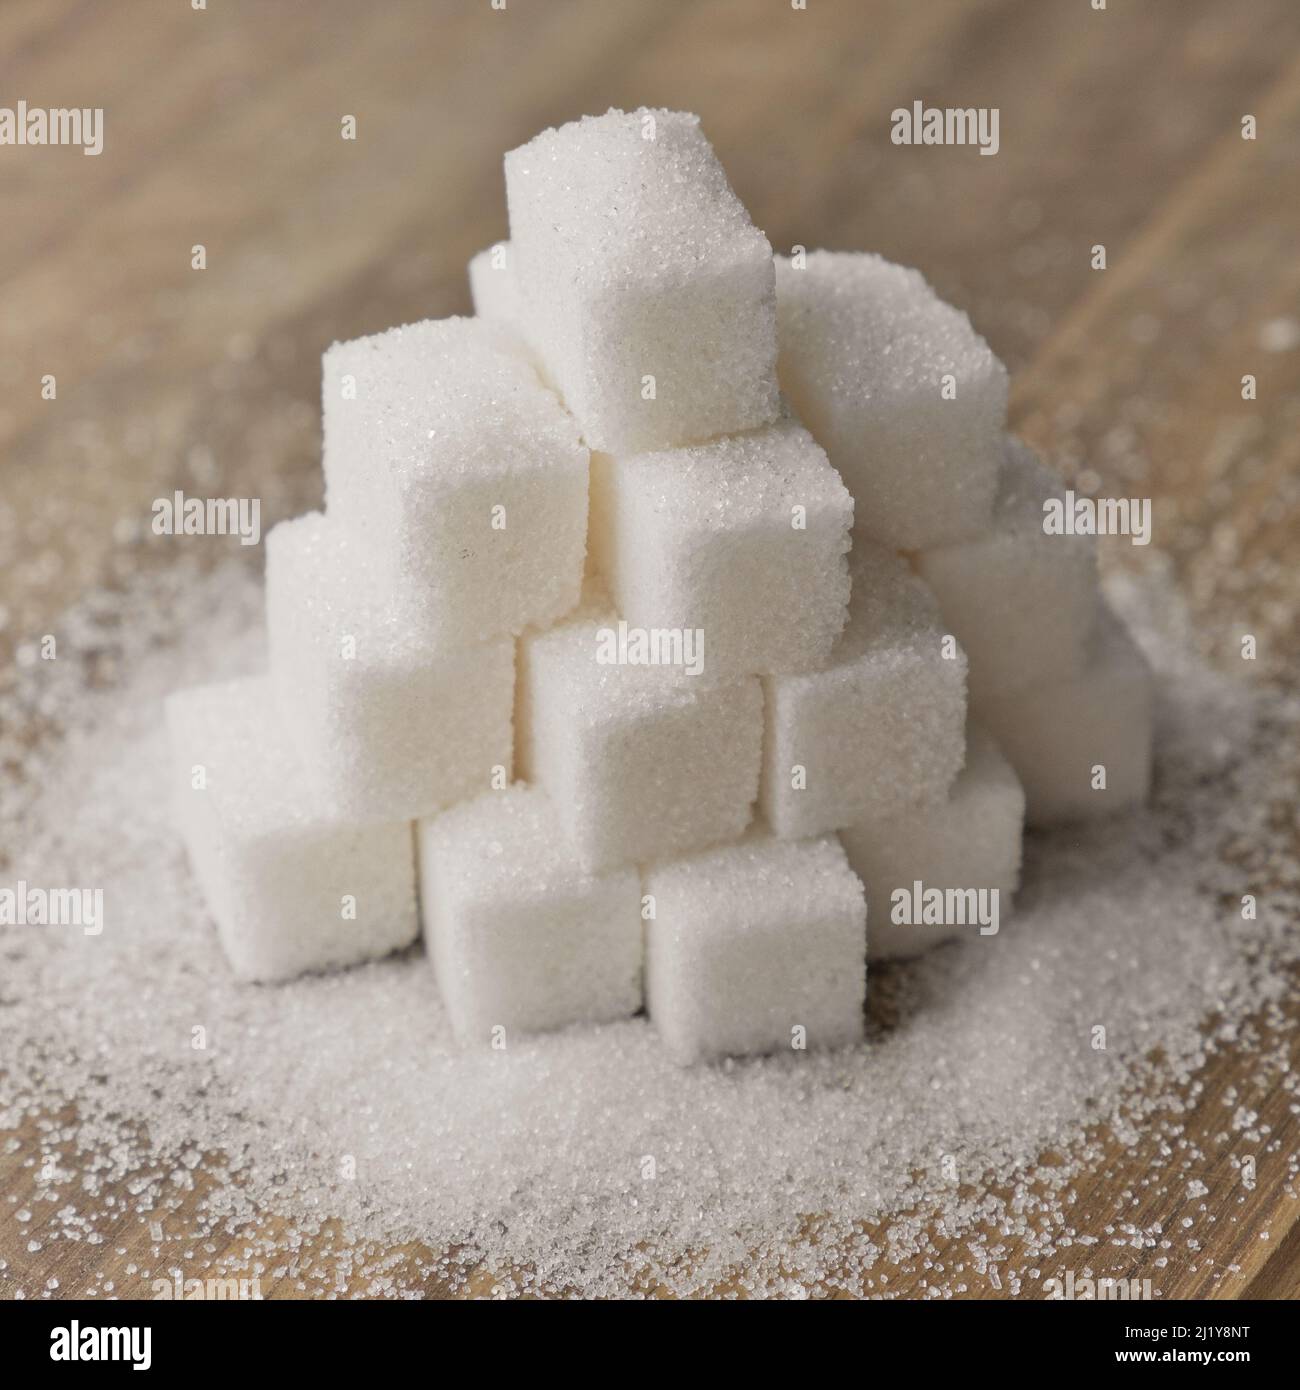 Lump sugar stacked in pyramid on wooden table. Sugar scattered on ...